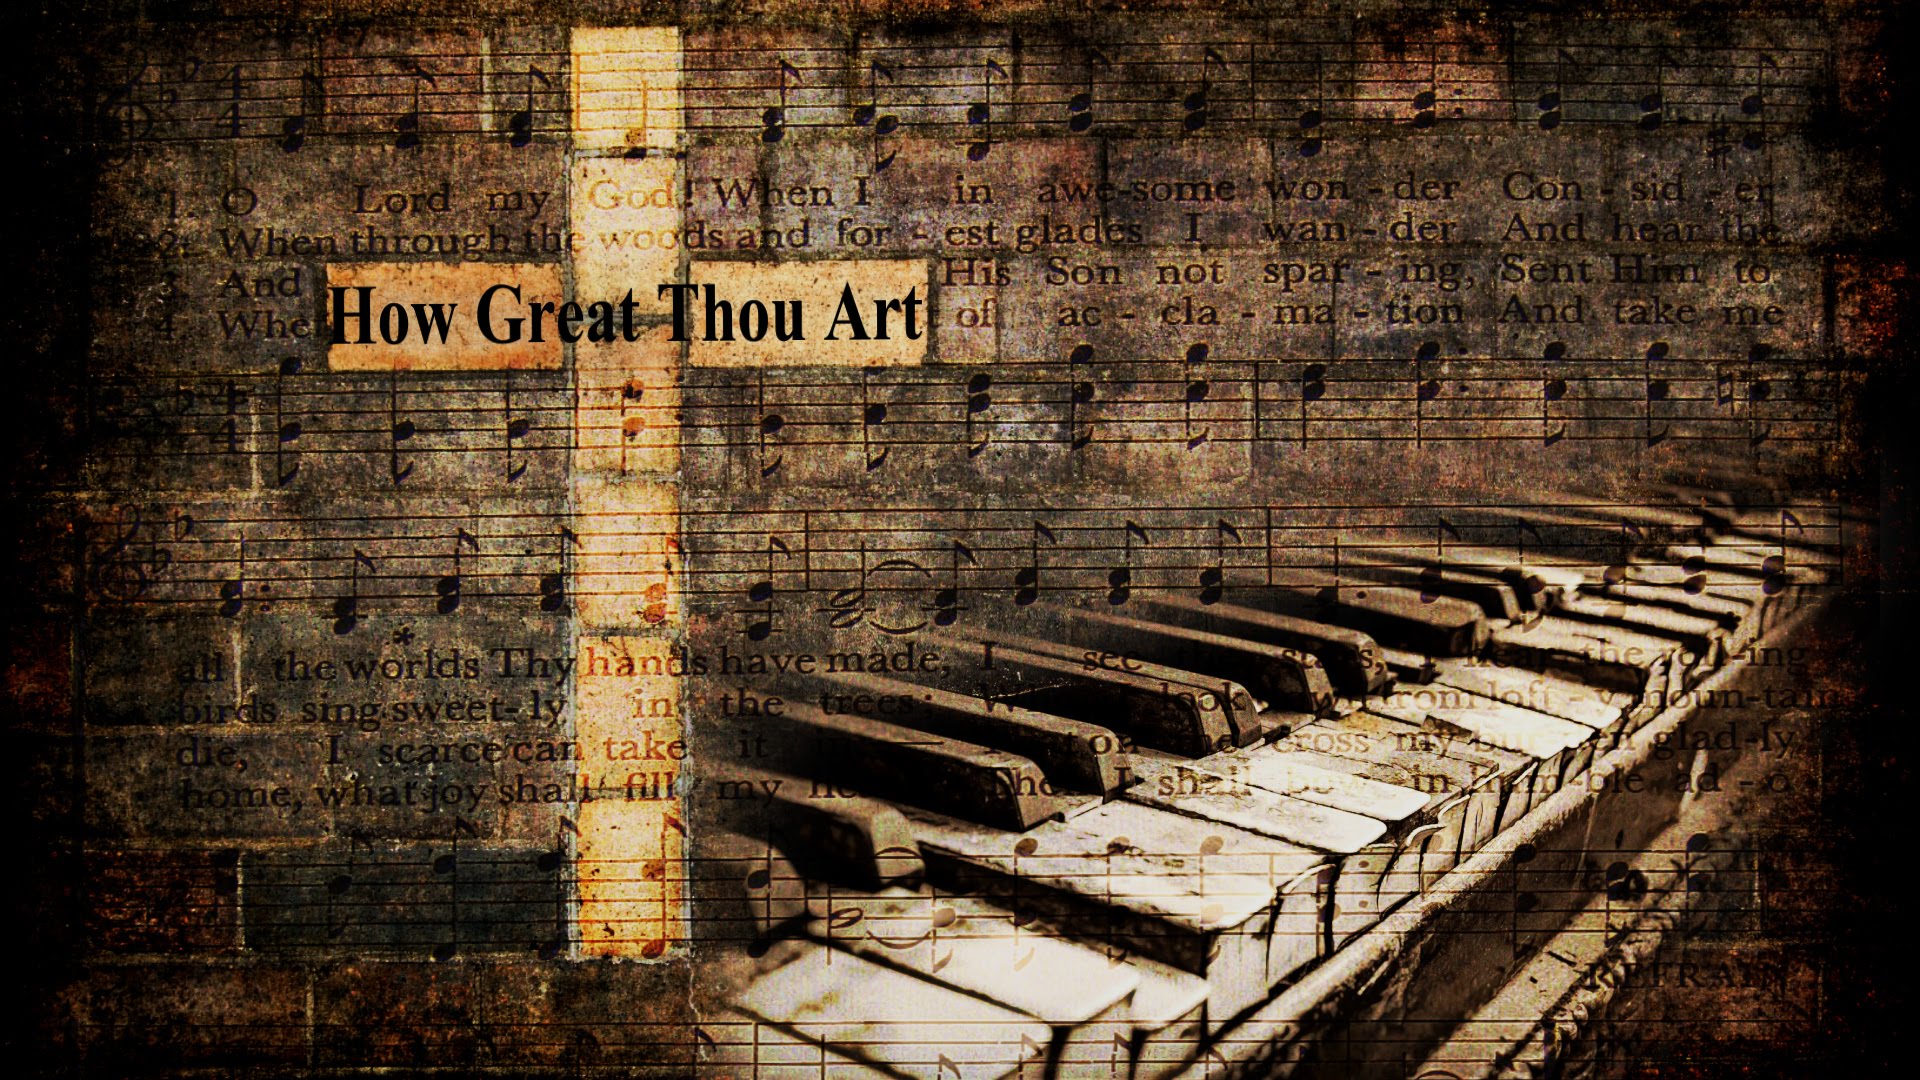 How Great Thou Art, Day 319